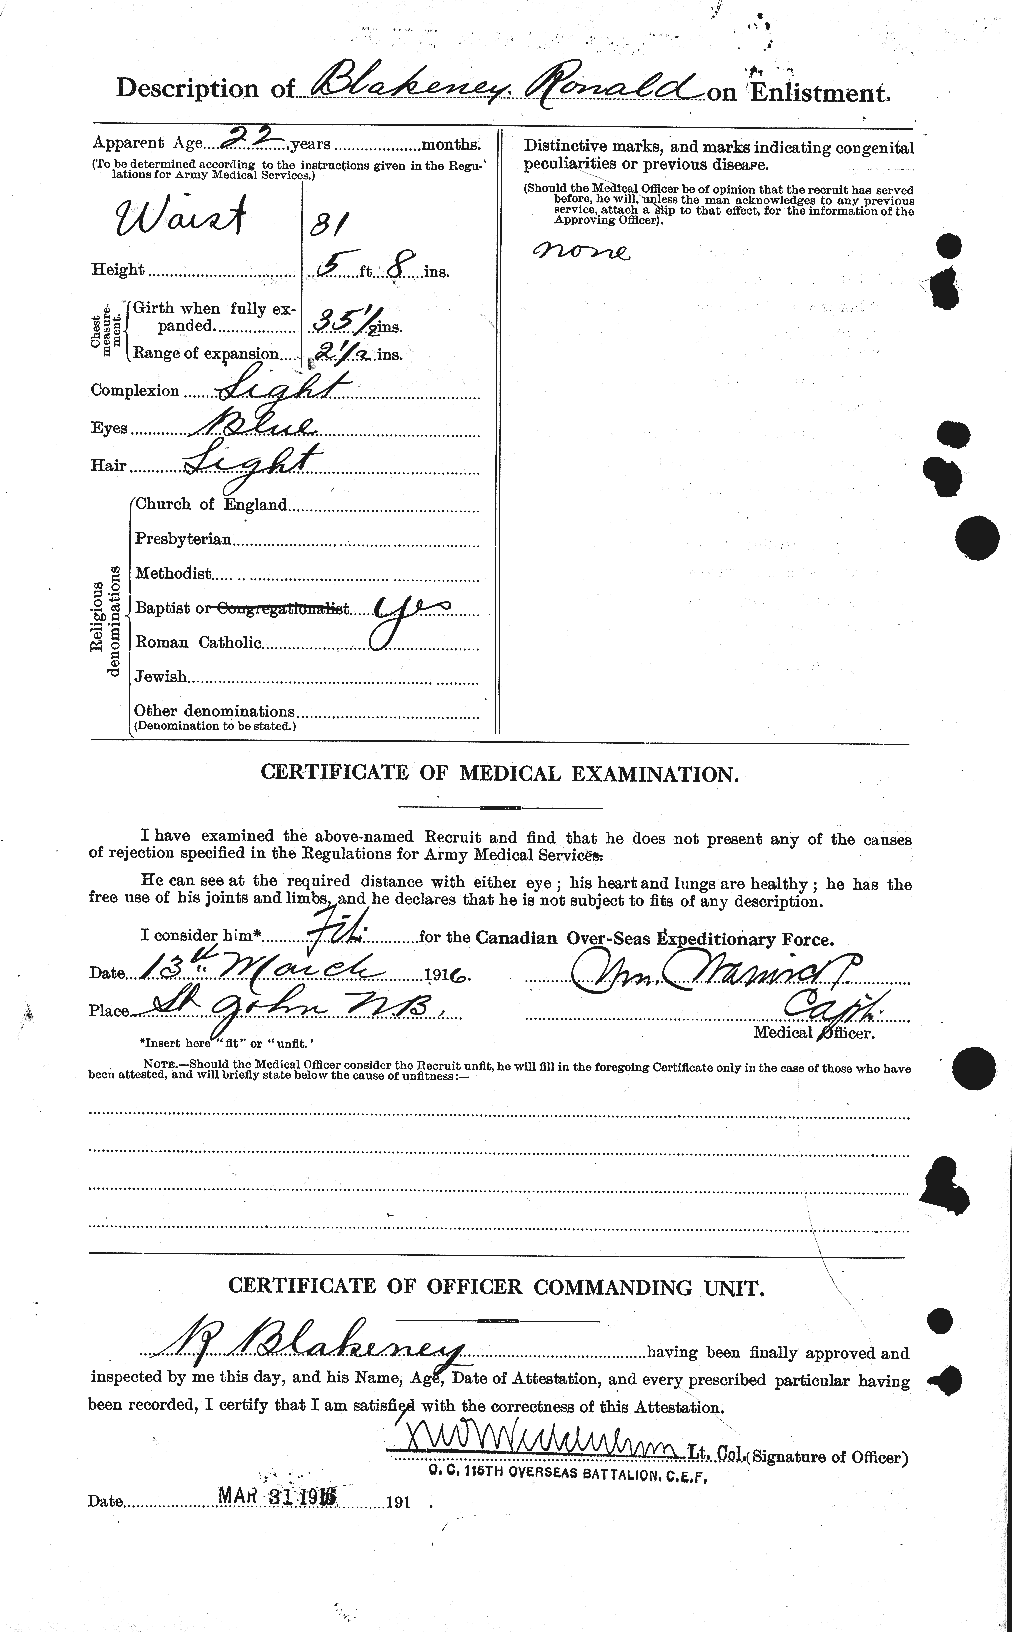 Personnel Records of the First World War - CEF 246771b